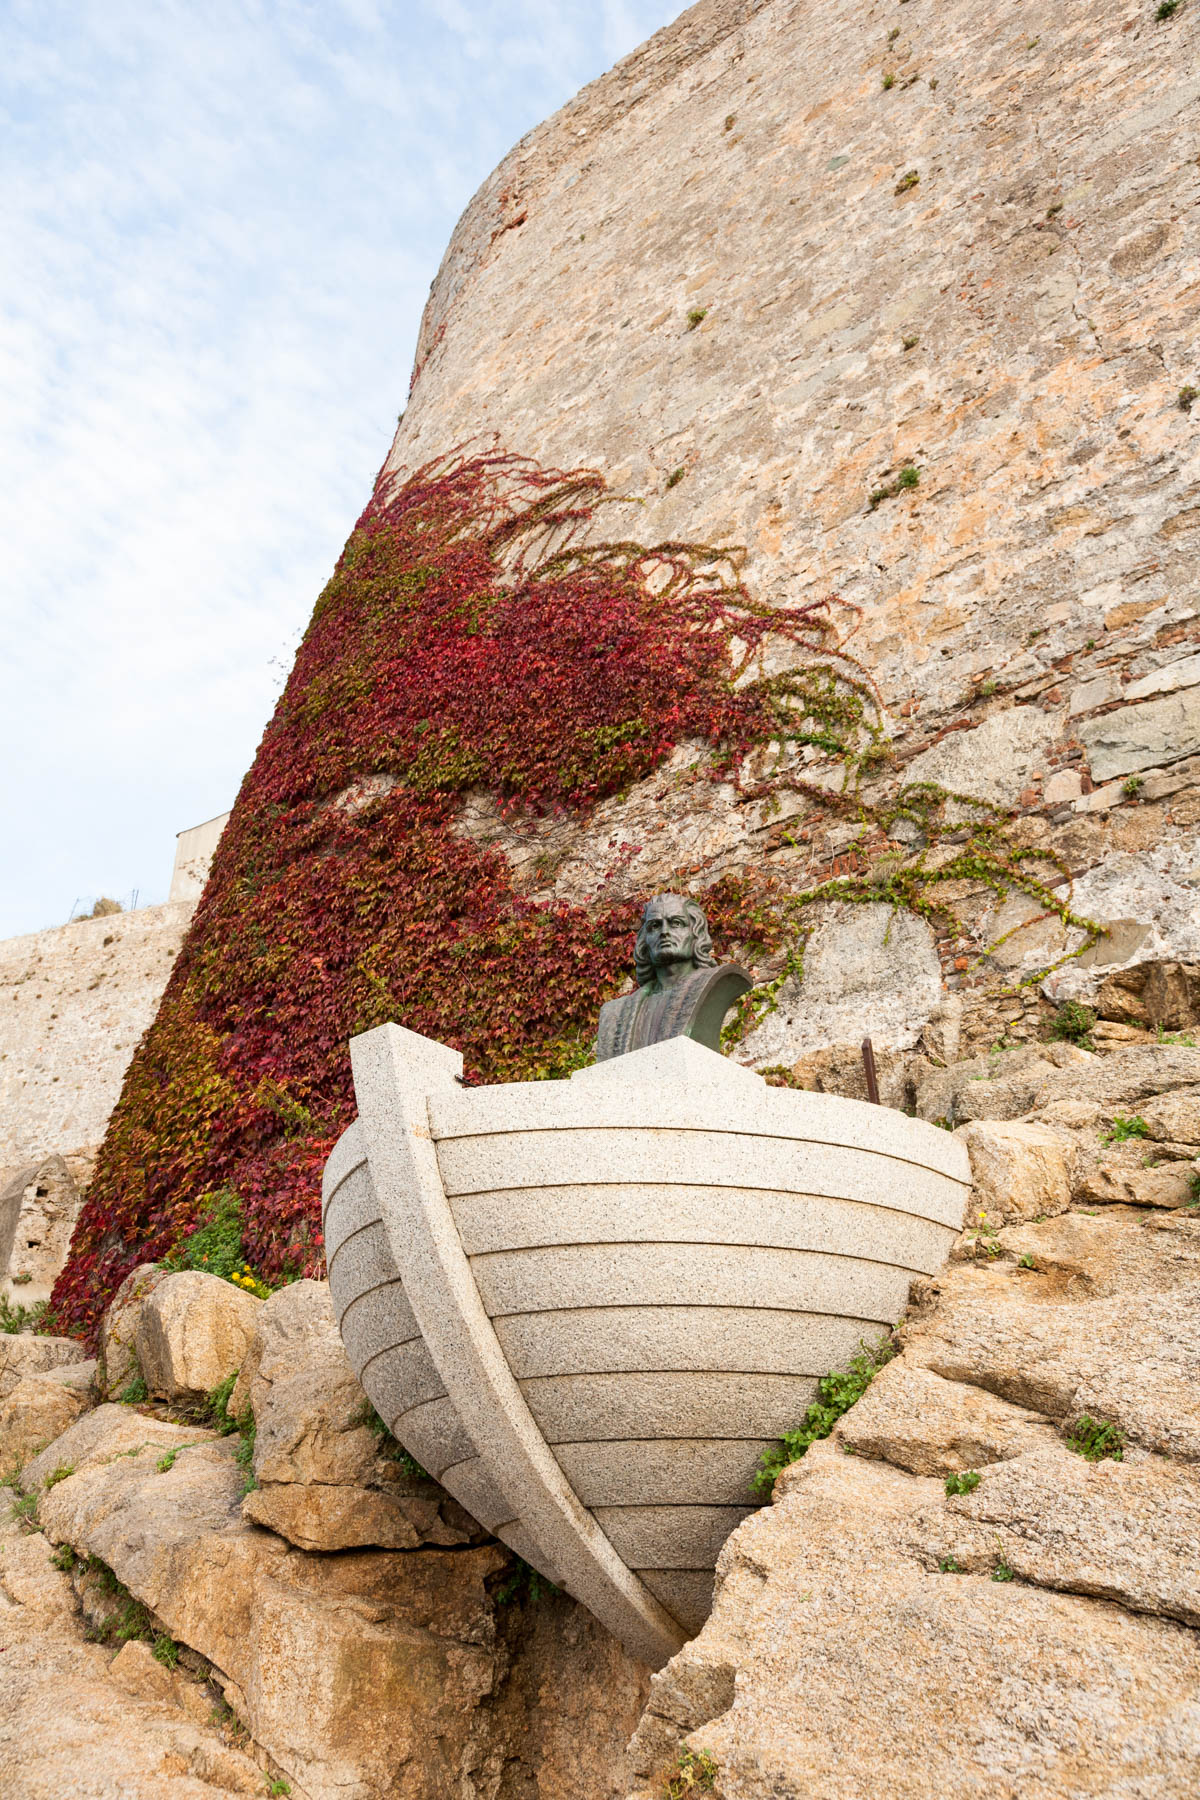 Sculpture of Christopher Columbus, in boat, protuding from wall with red ivy climbing behind.